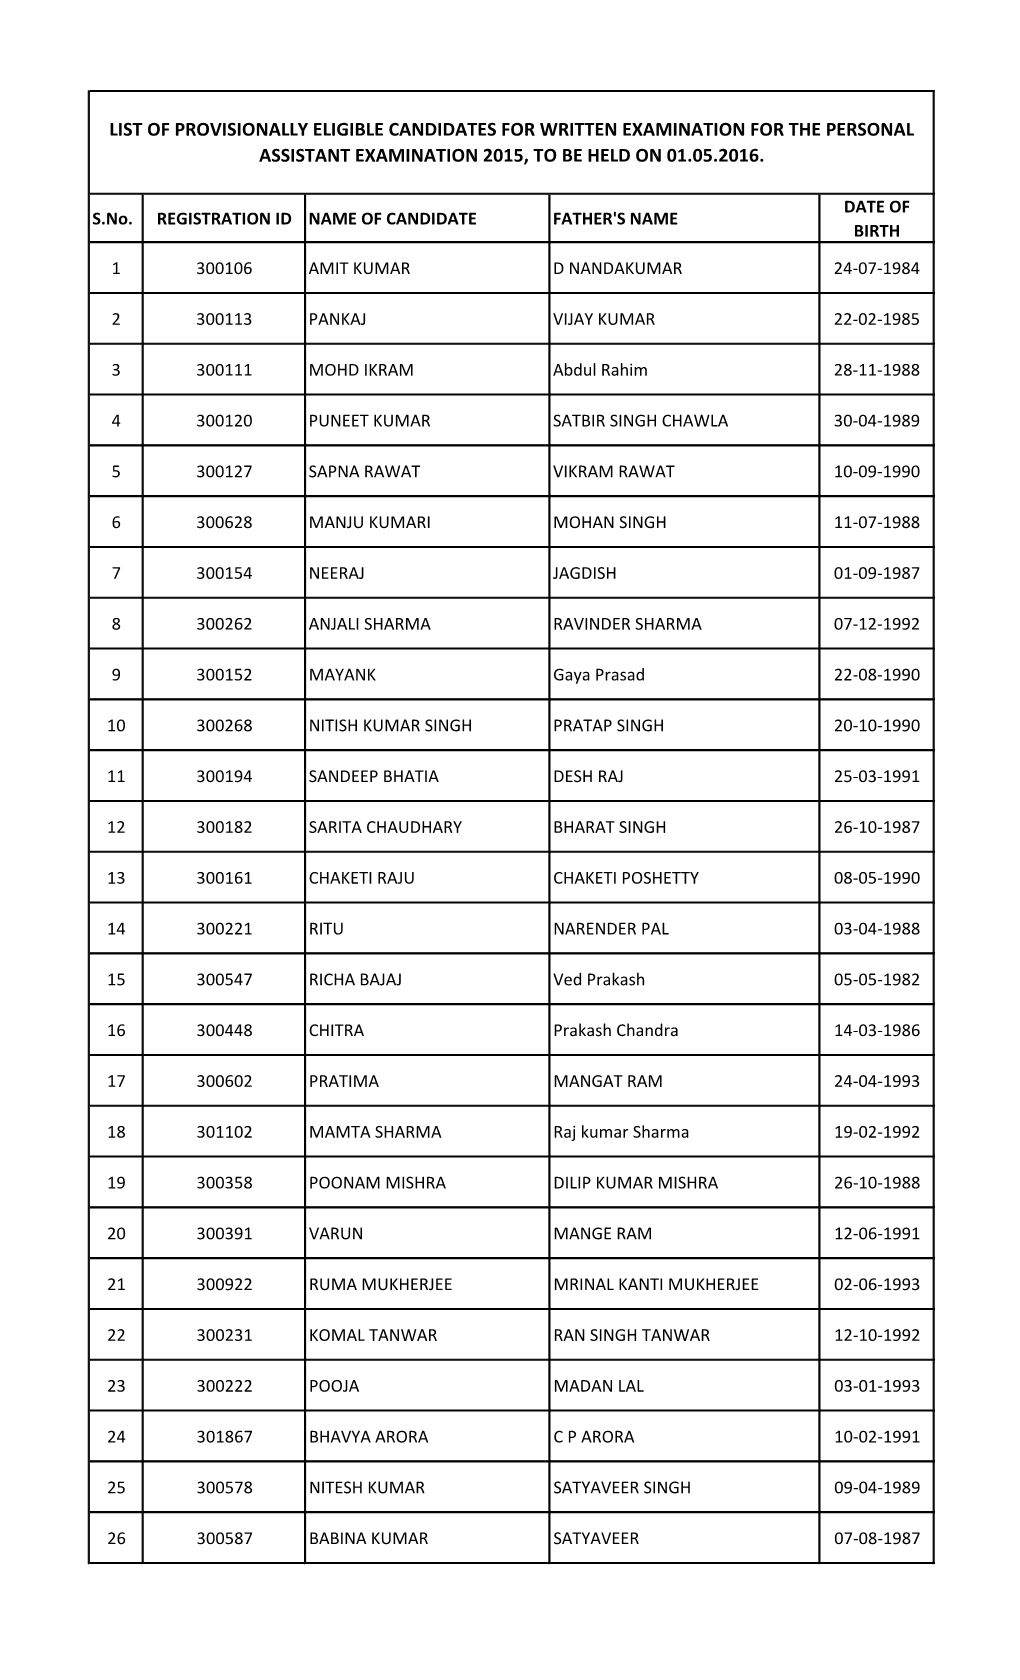 List of Provisionally Eligible Candidates for Written Examination for the Personal Assistant Examination 2015, to Be Held on 01.05.2016